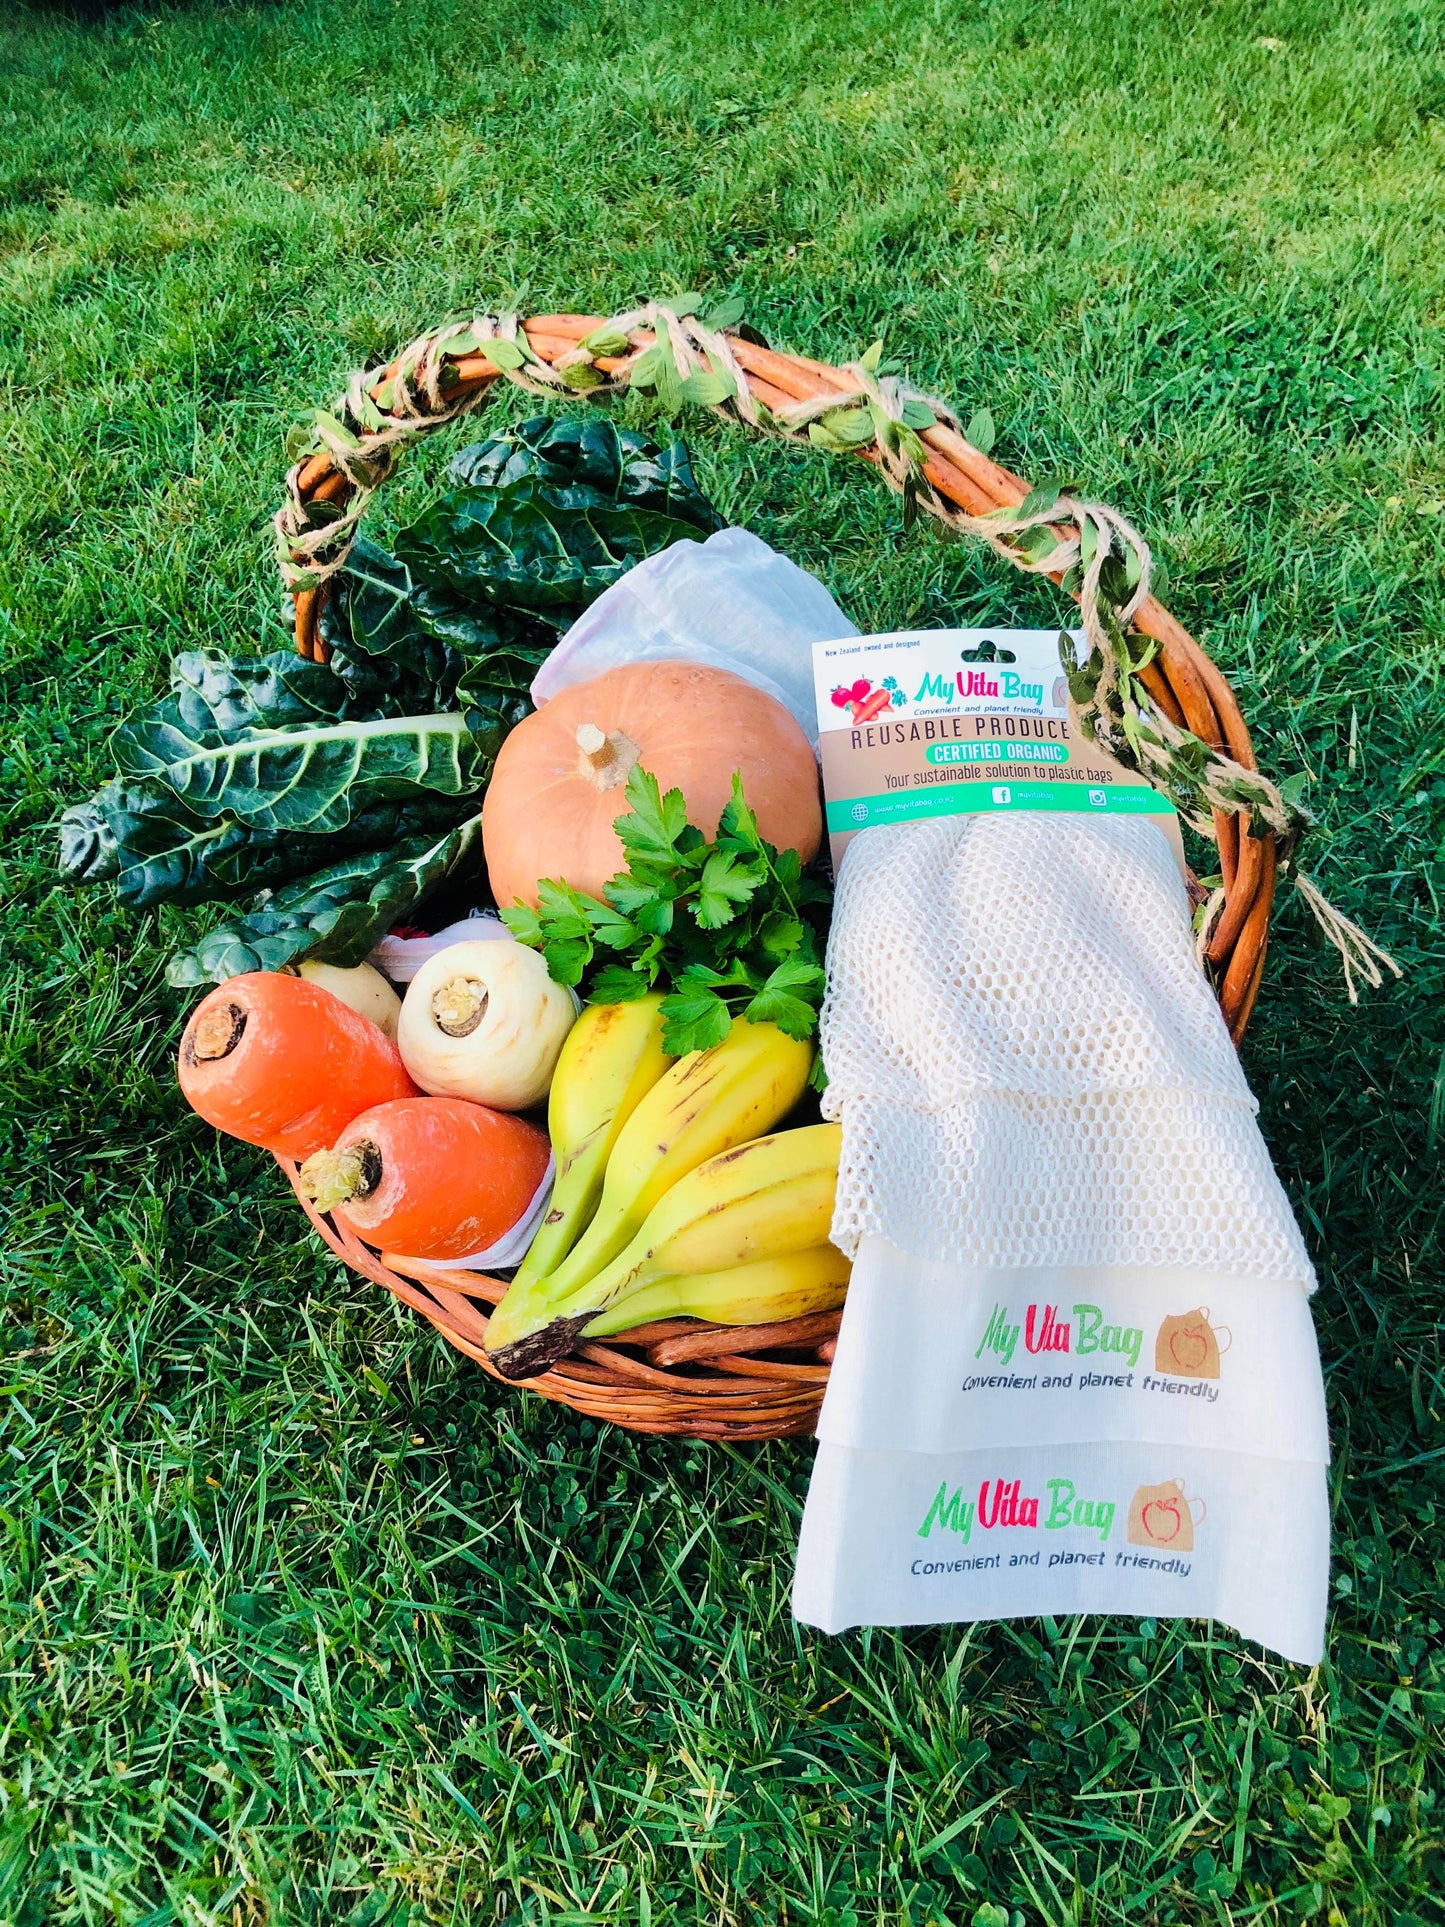 produce bags for fresh vegetables and can use as fundraiser with my eco vita for schools and clubs